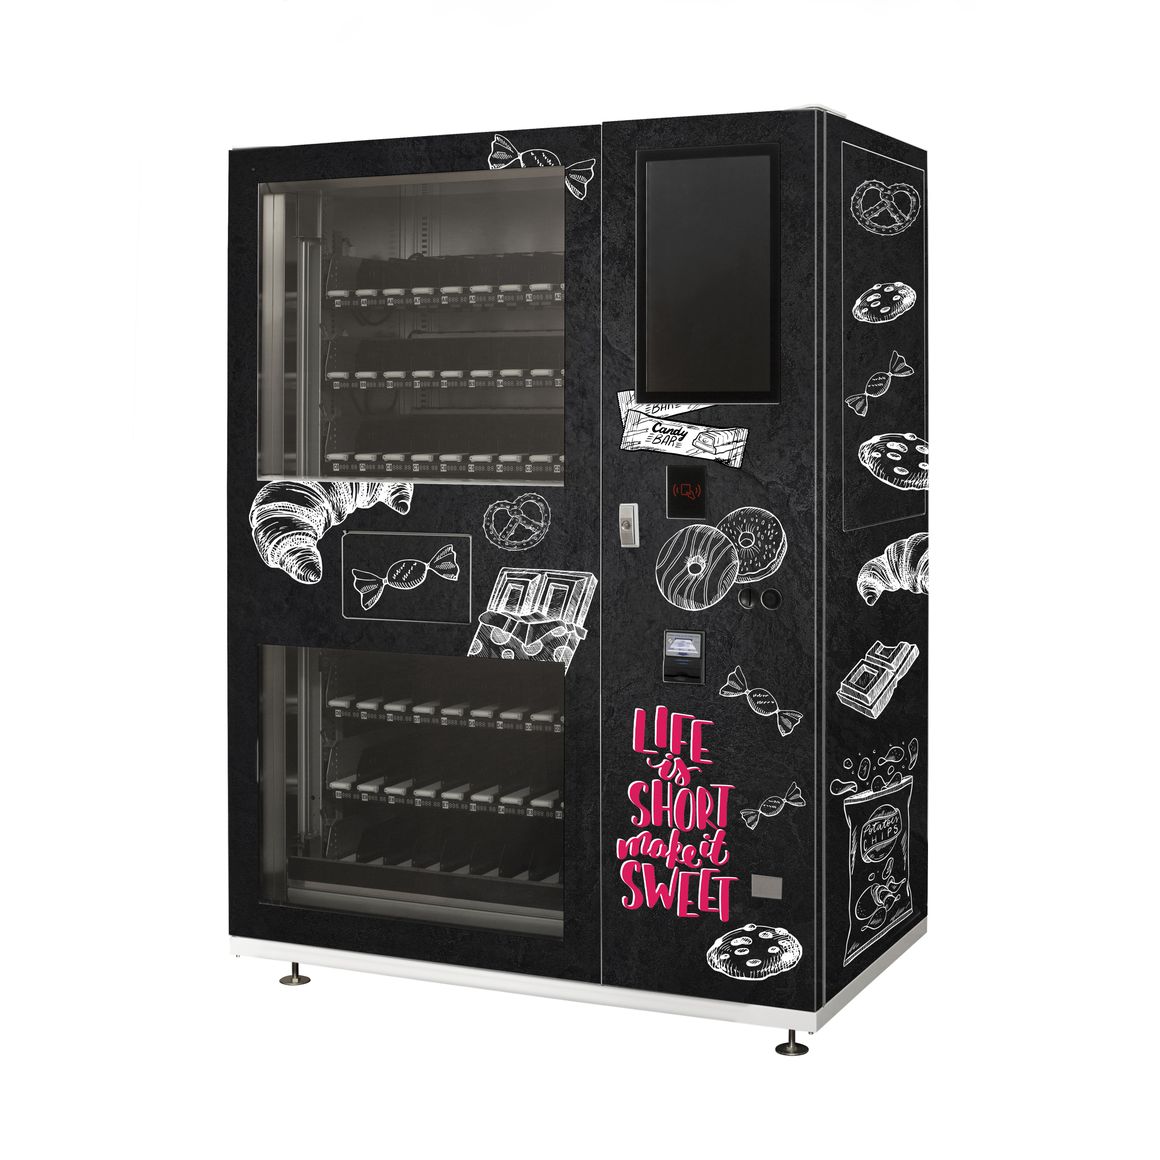 vending machine for snacks and beverages